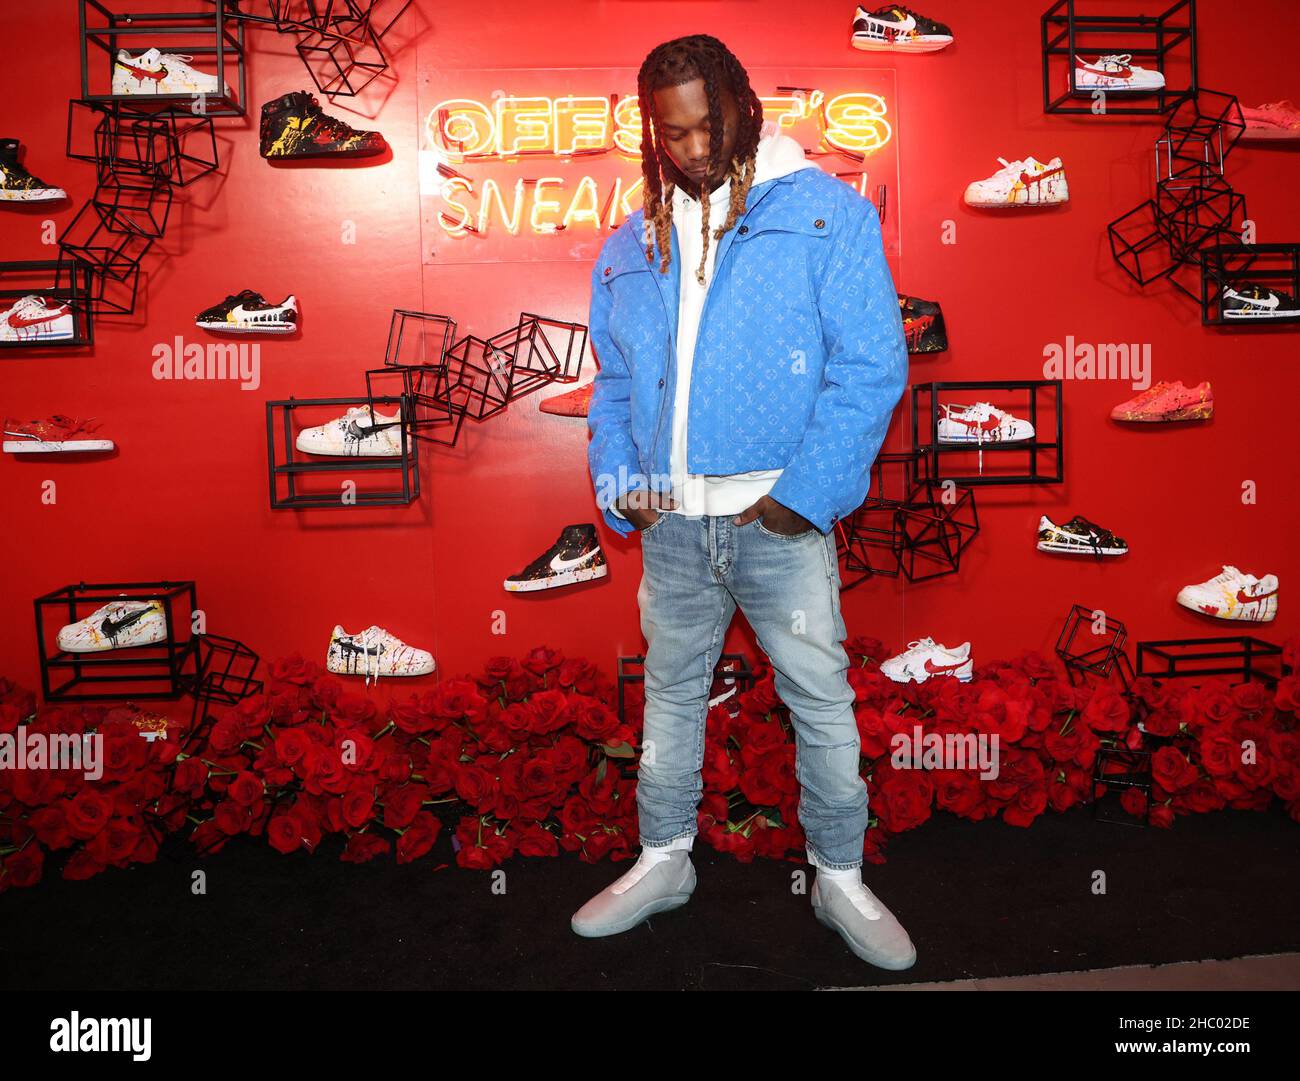 Los Angeles, Ca. 21st Dec, 2021. Offset at Offset's 30th Birthday Party hosted by Cardi B at Sneakertopia LA in Los Angeles, California on December 21, 2021. Credit: Walik Goshorn/Media Punch/Alamy Live News Stock Photo